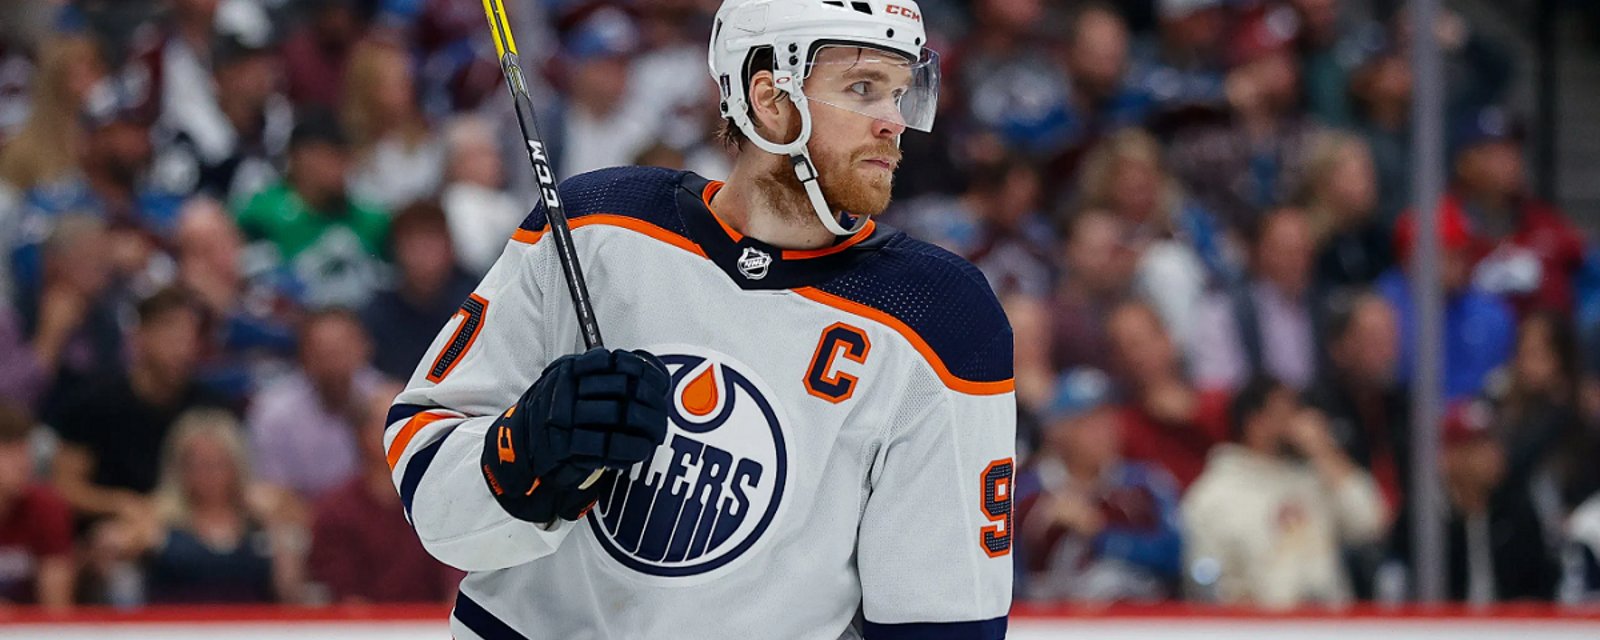 Kris Knoblauch shares an update on Connor McDavid.